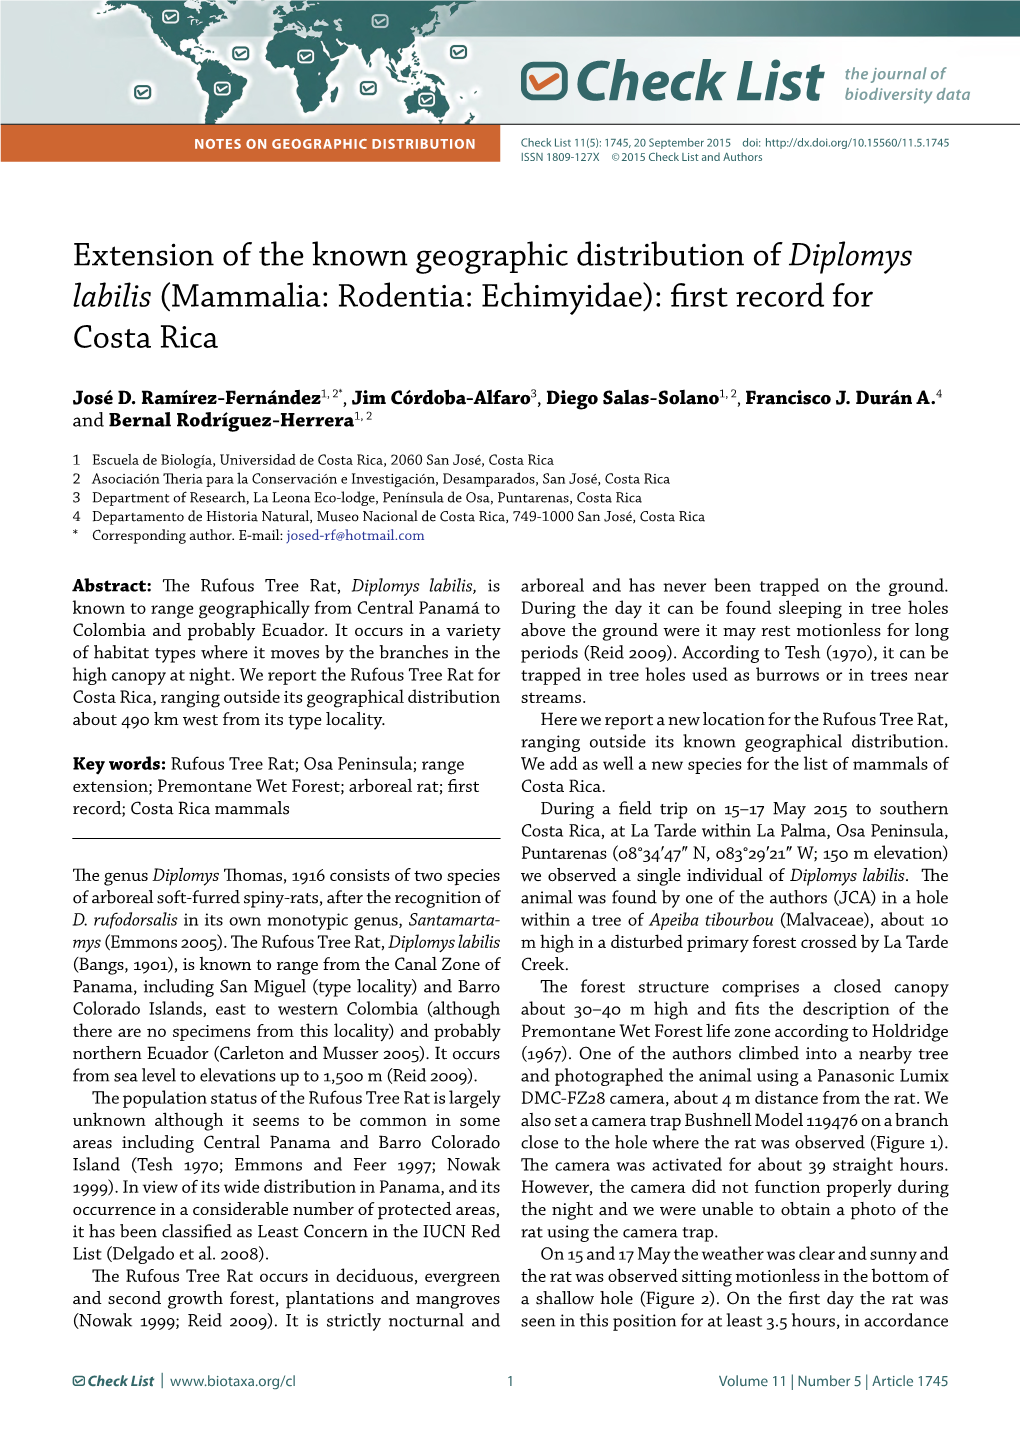 Extension of the Known Geographic Distribution of Diplomys Labilis (Mammalia: Rodentia: Echimyidae): First Record for Costa Rica